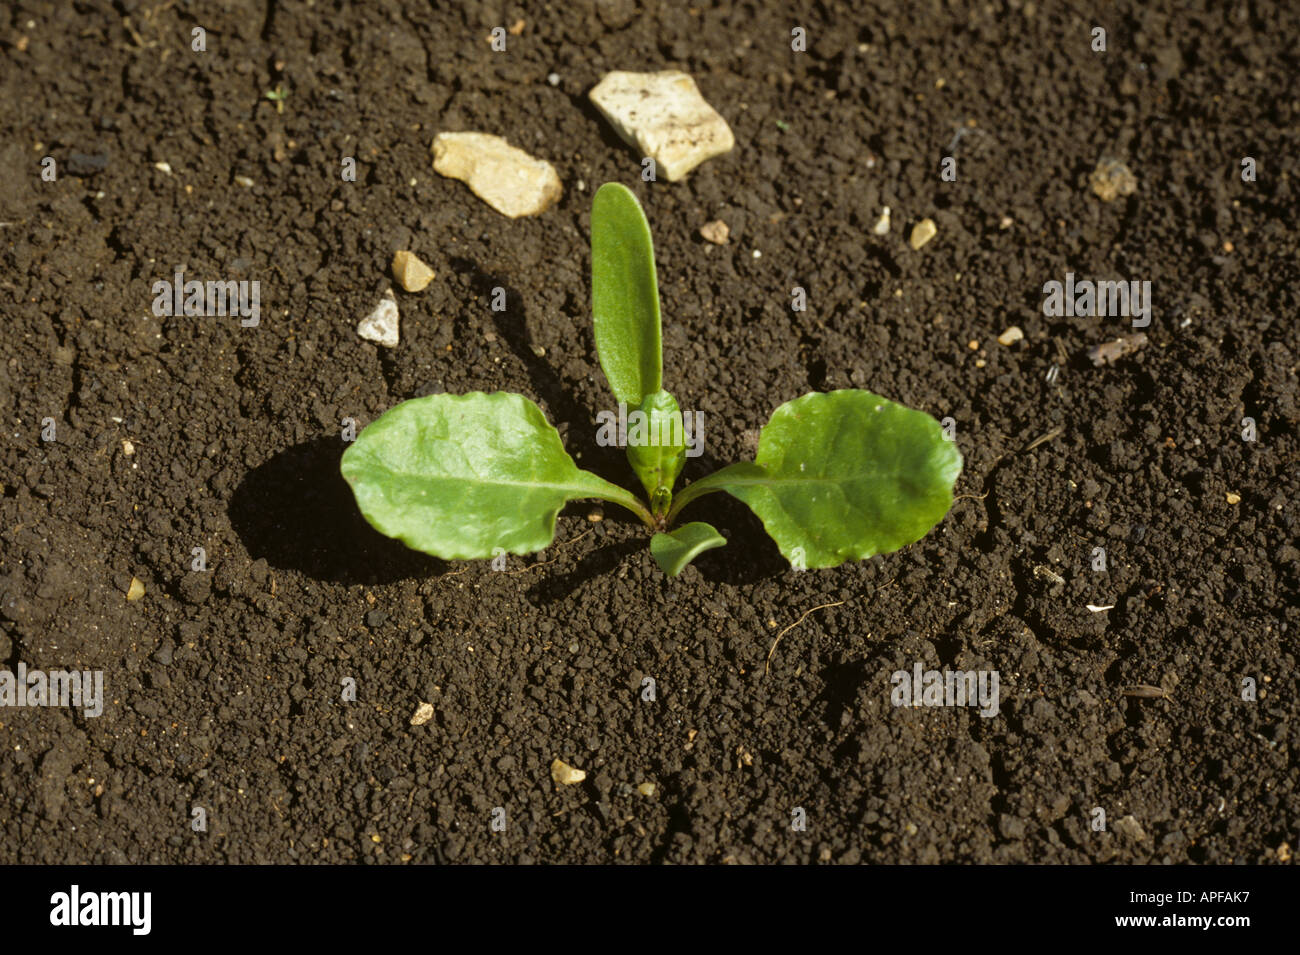 Sugar beet seedling with cotyledons and two true leaves Stock Photo